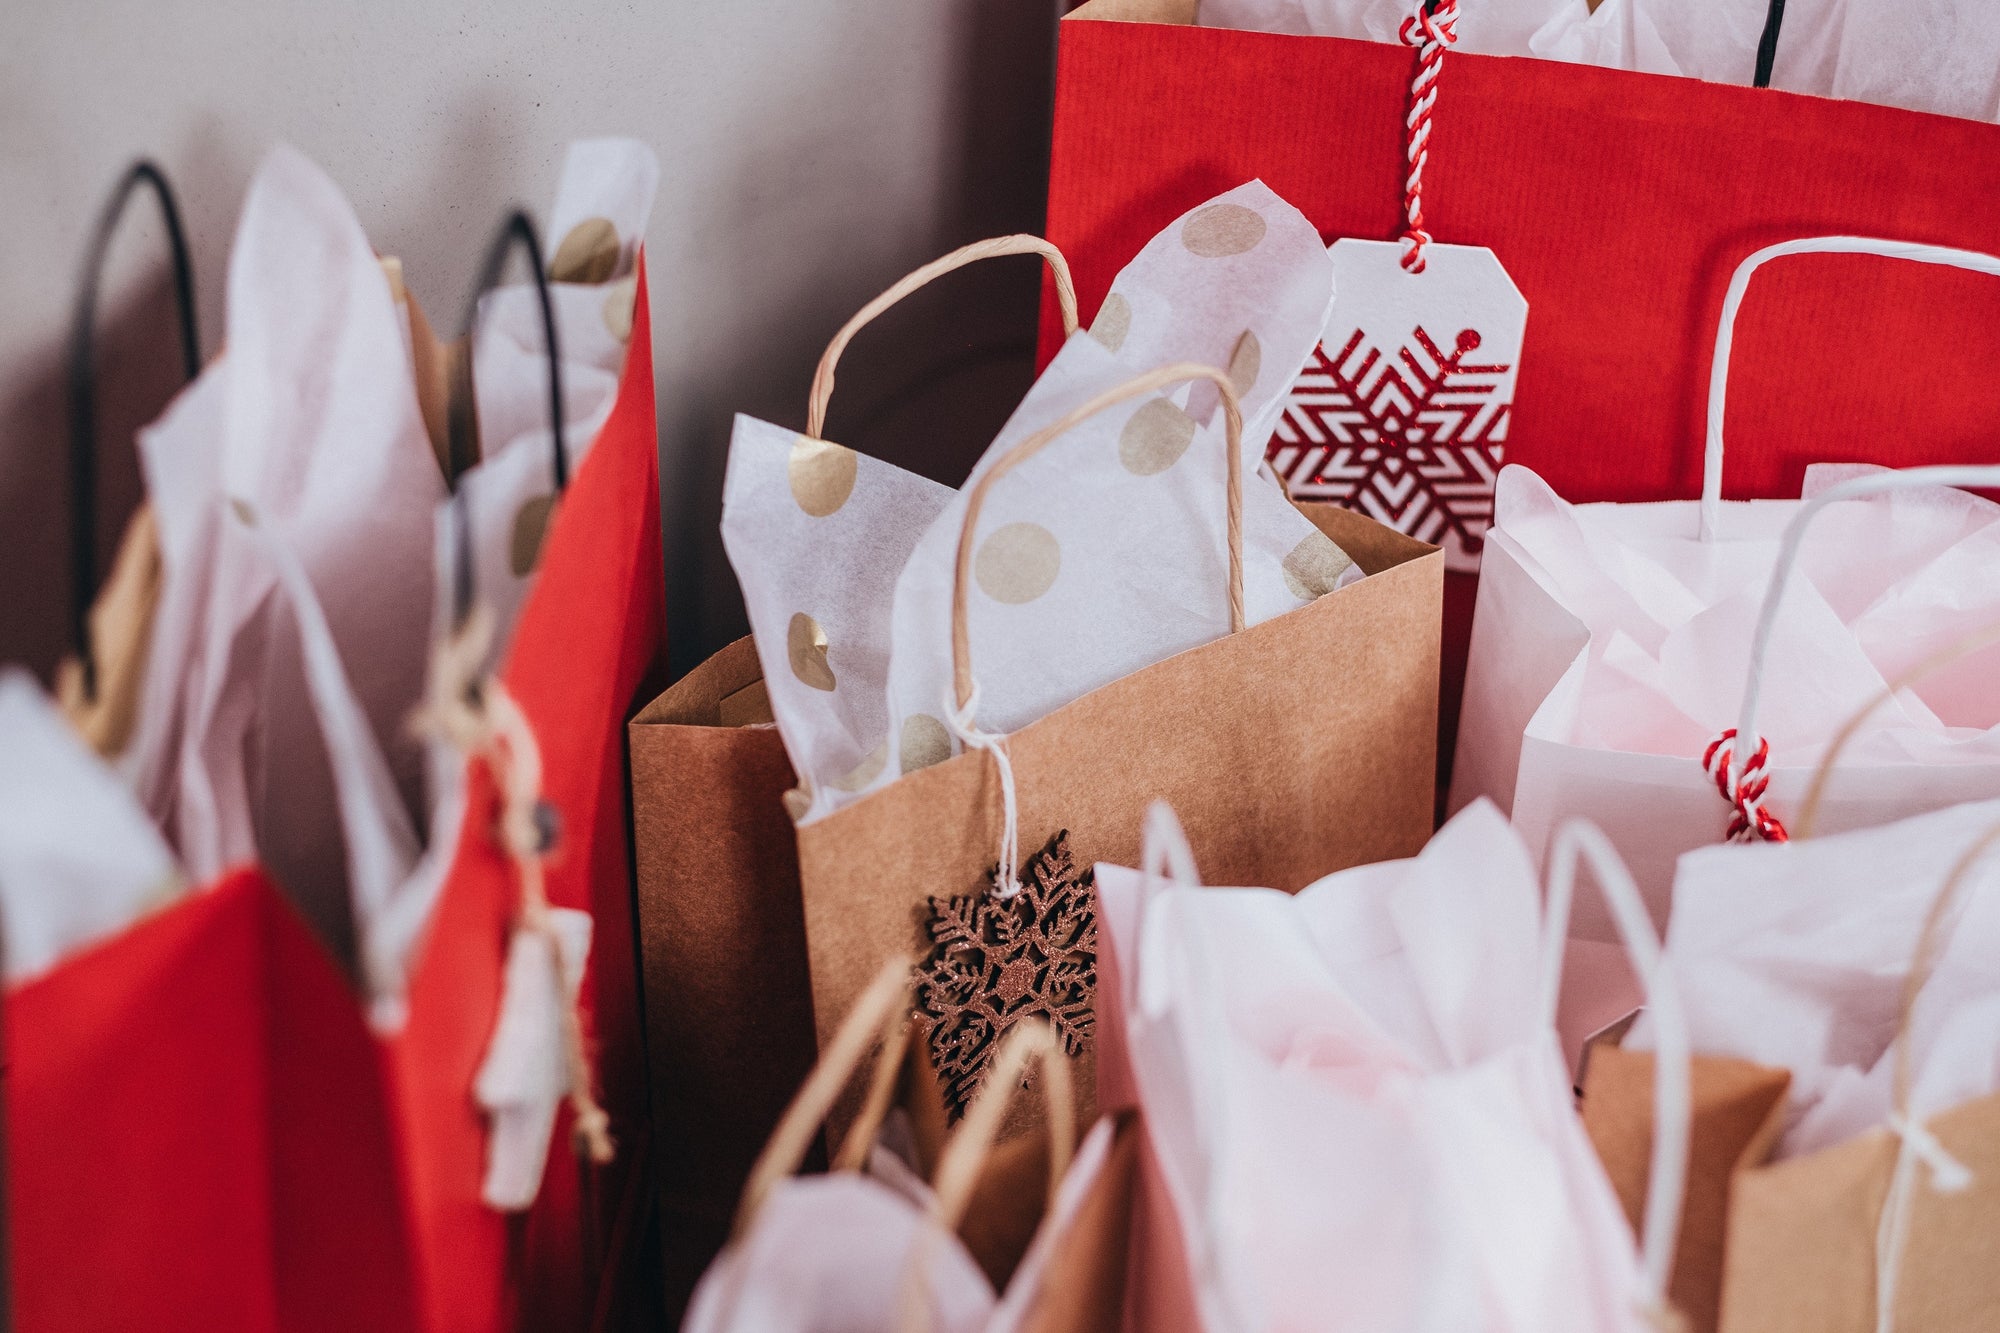 How To: 3 Ways To Shop Sustainably This Holiday Season